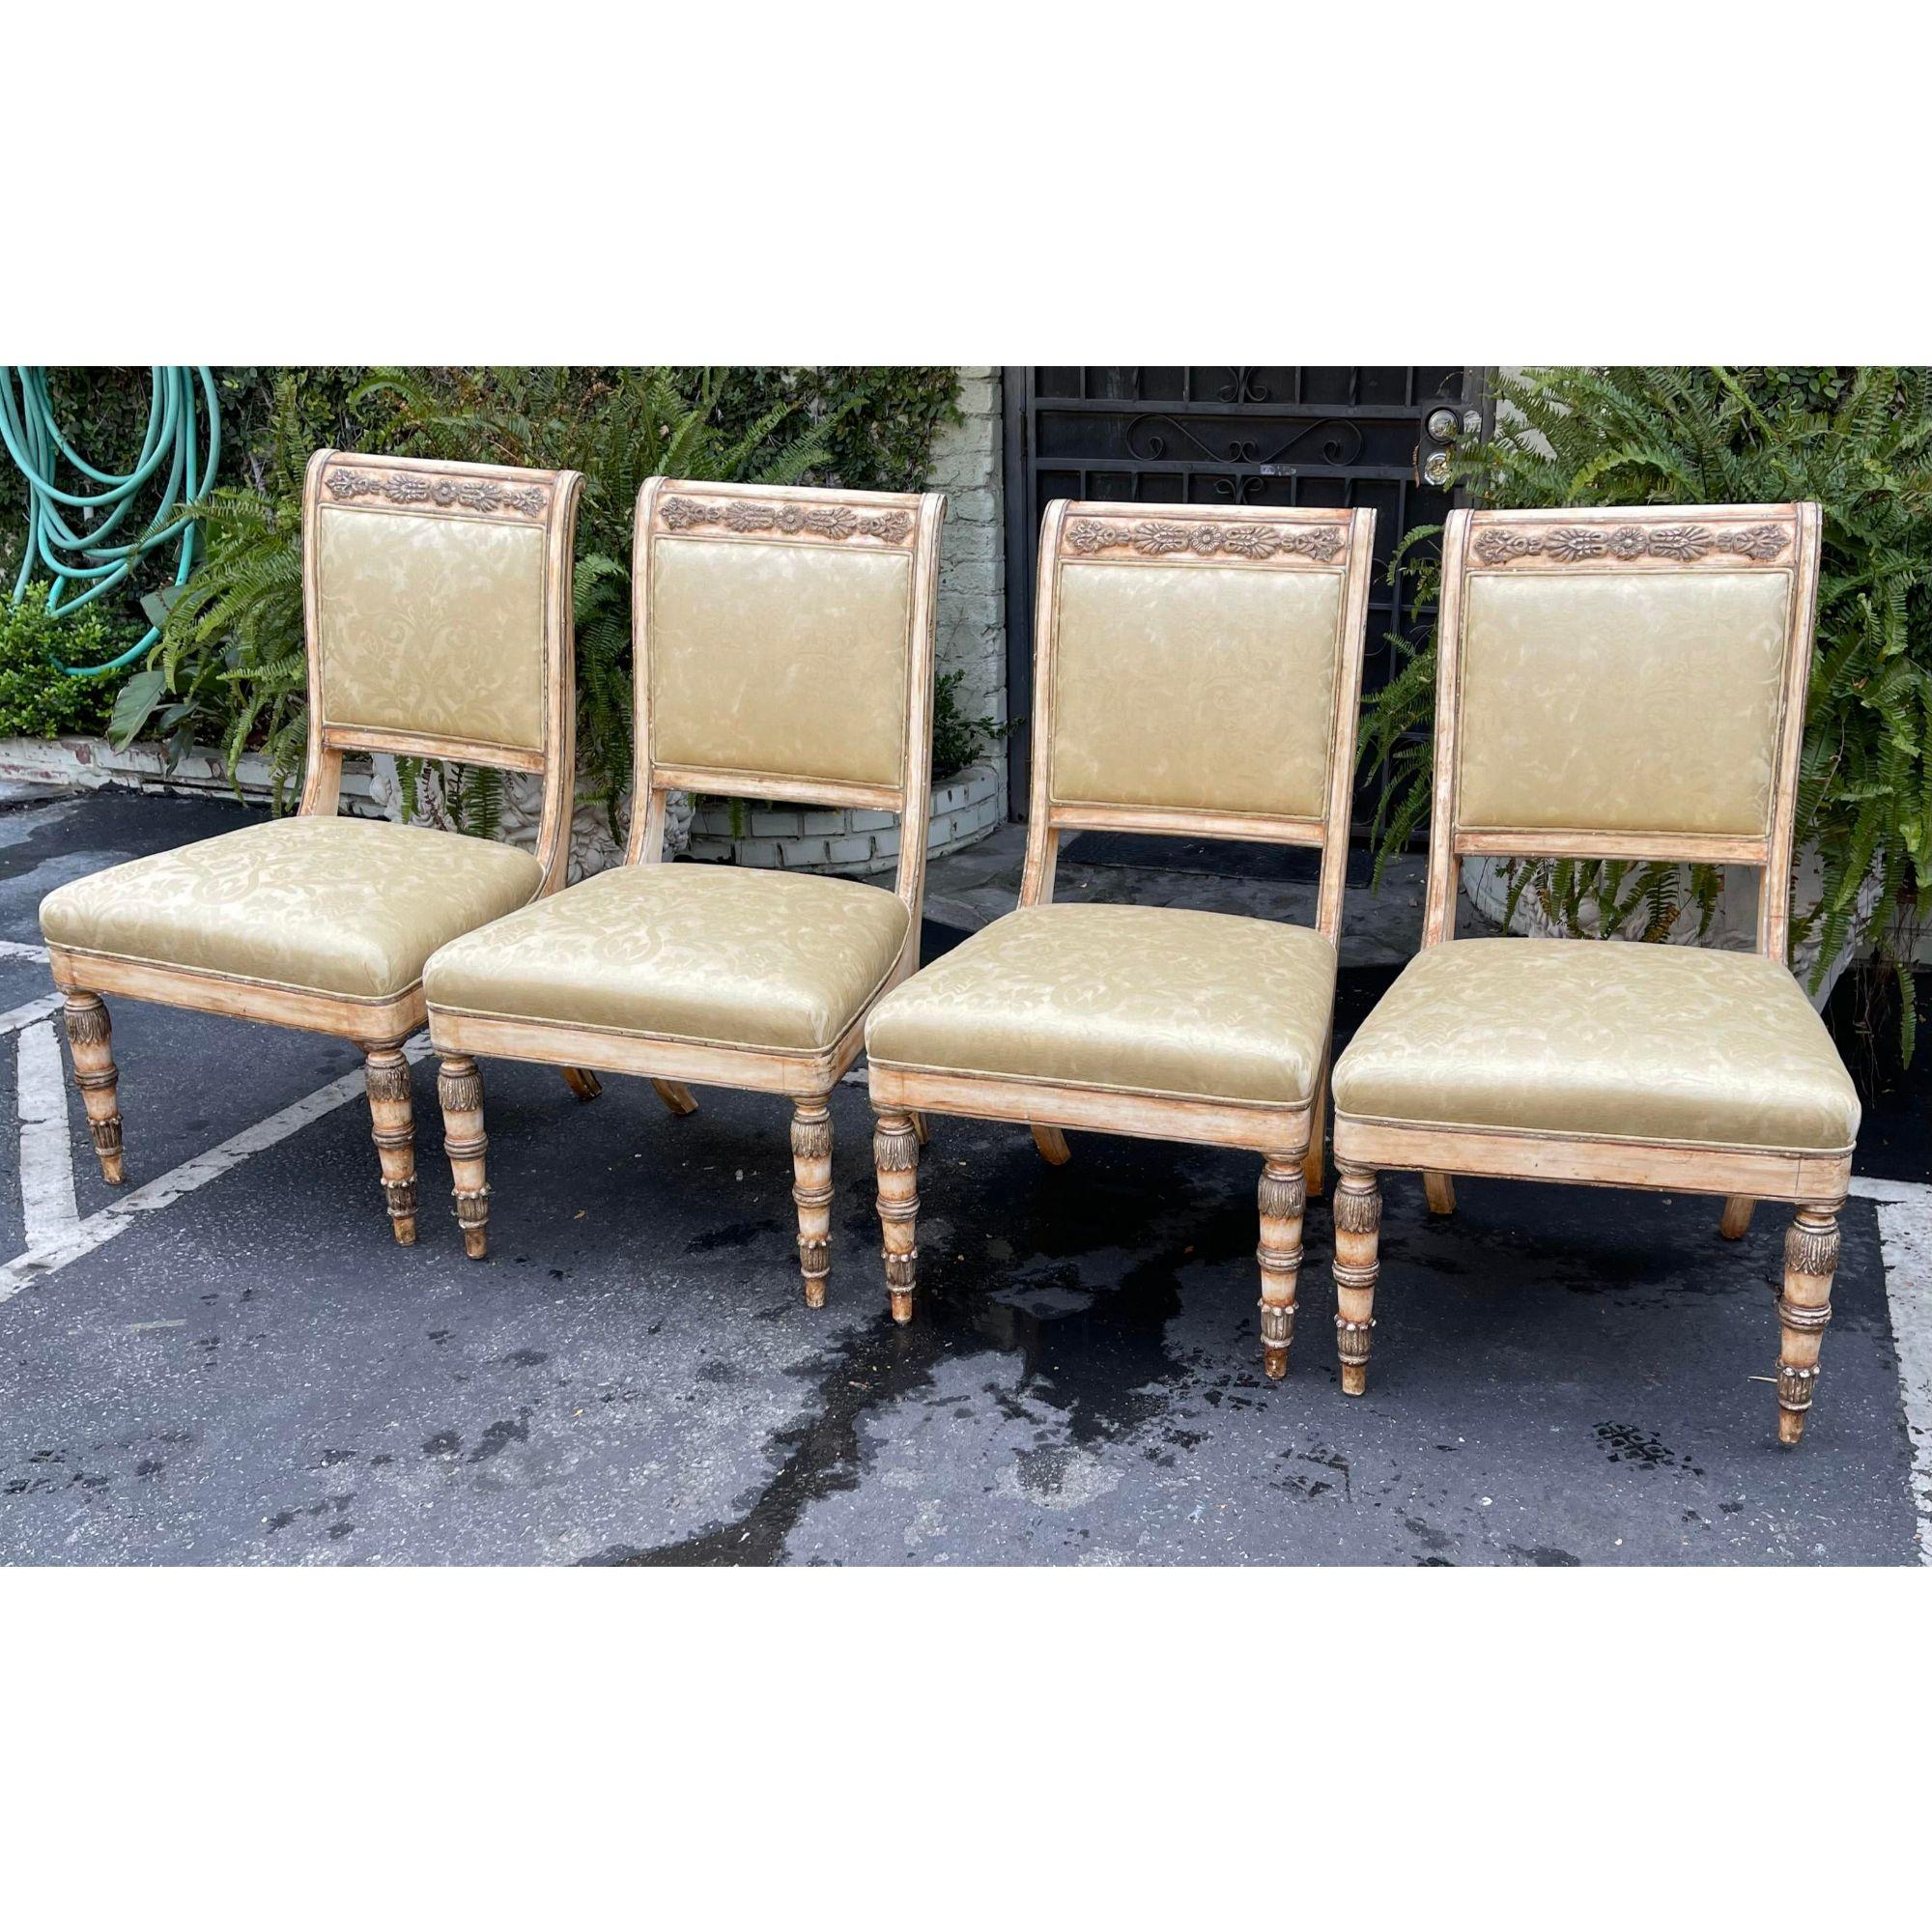 Set of 4, 19th C Style Charles Pollock Russian Imperial Dining Chairs In Good Condition For Sale In LOS ANGELES, CA